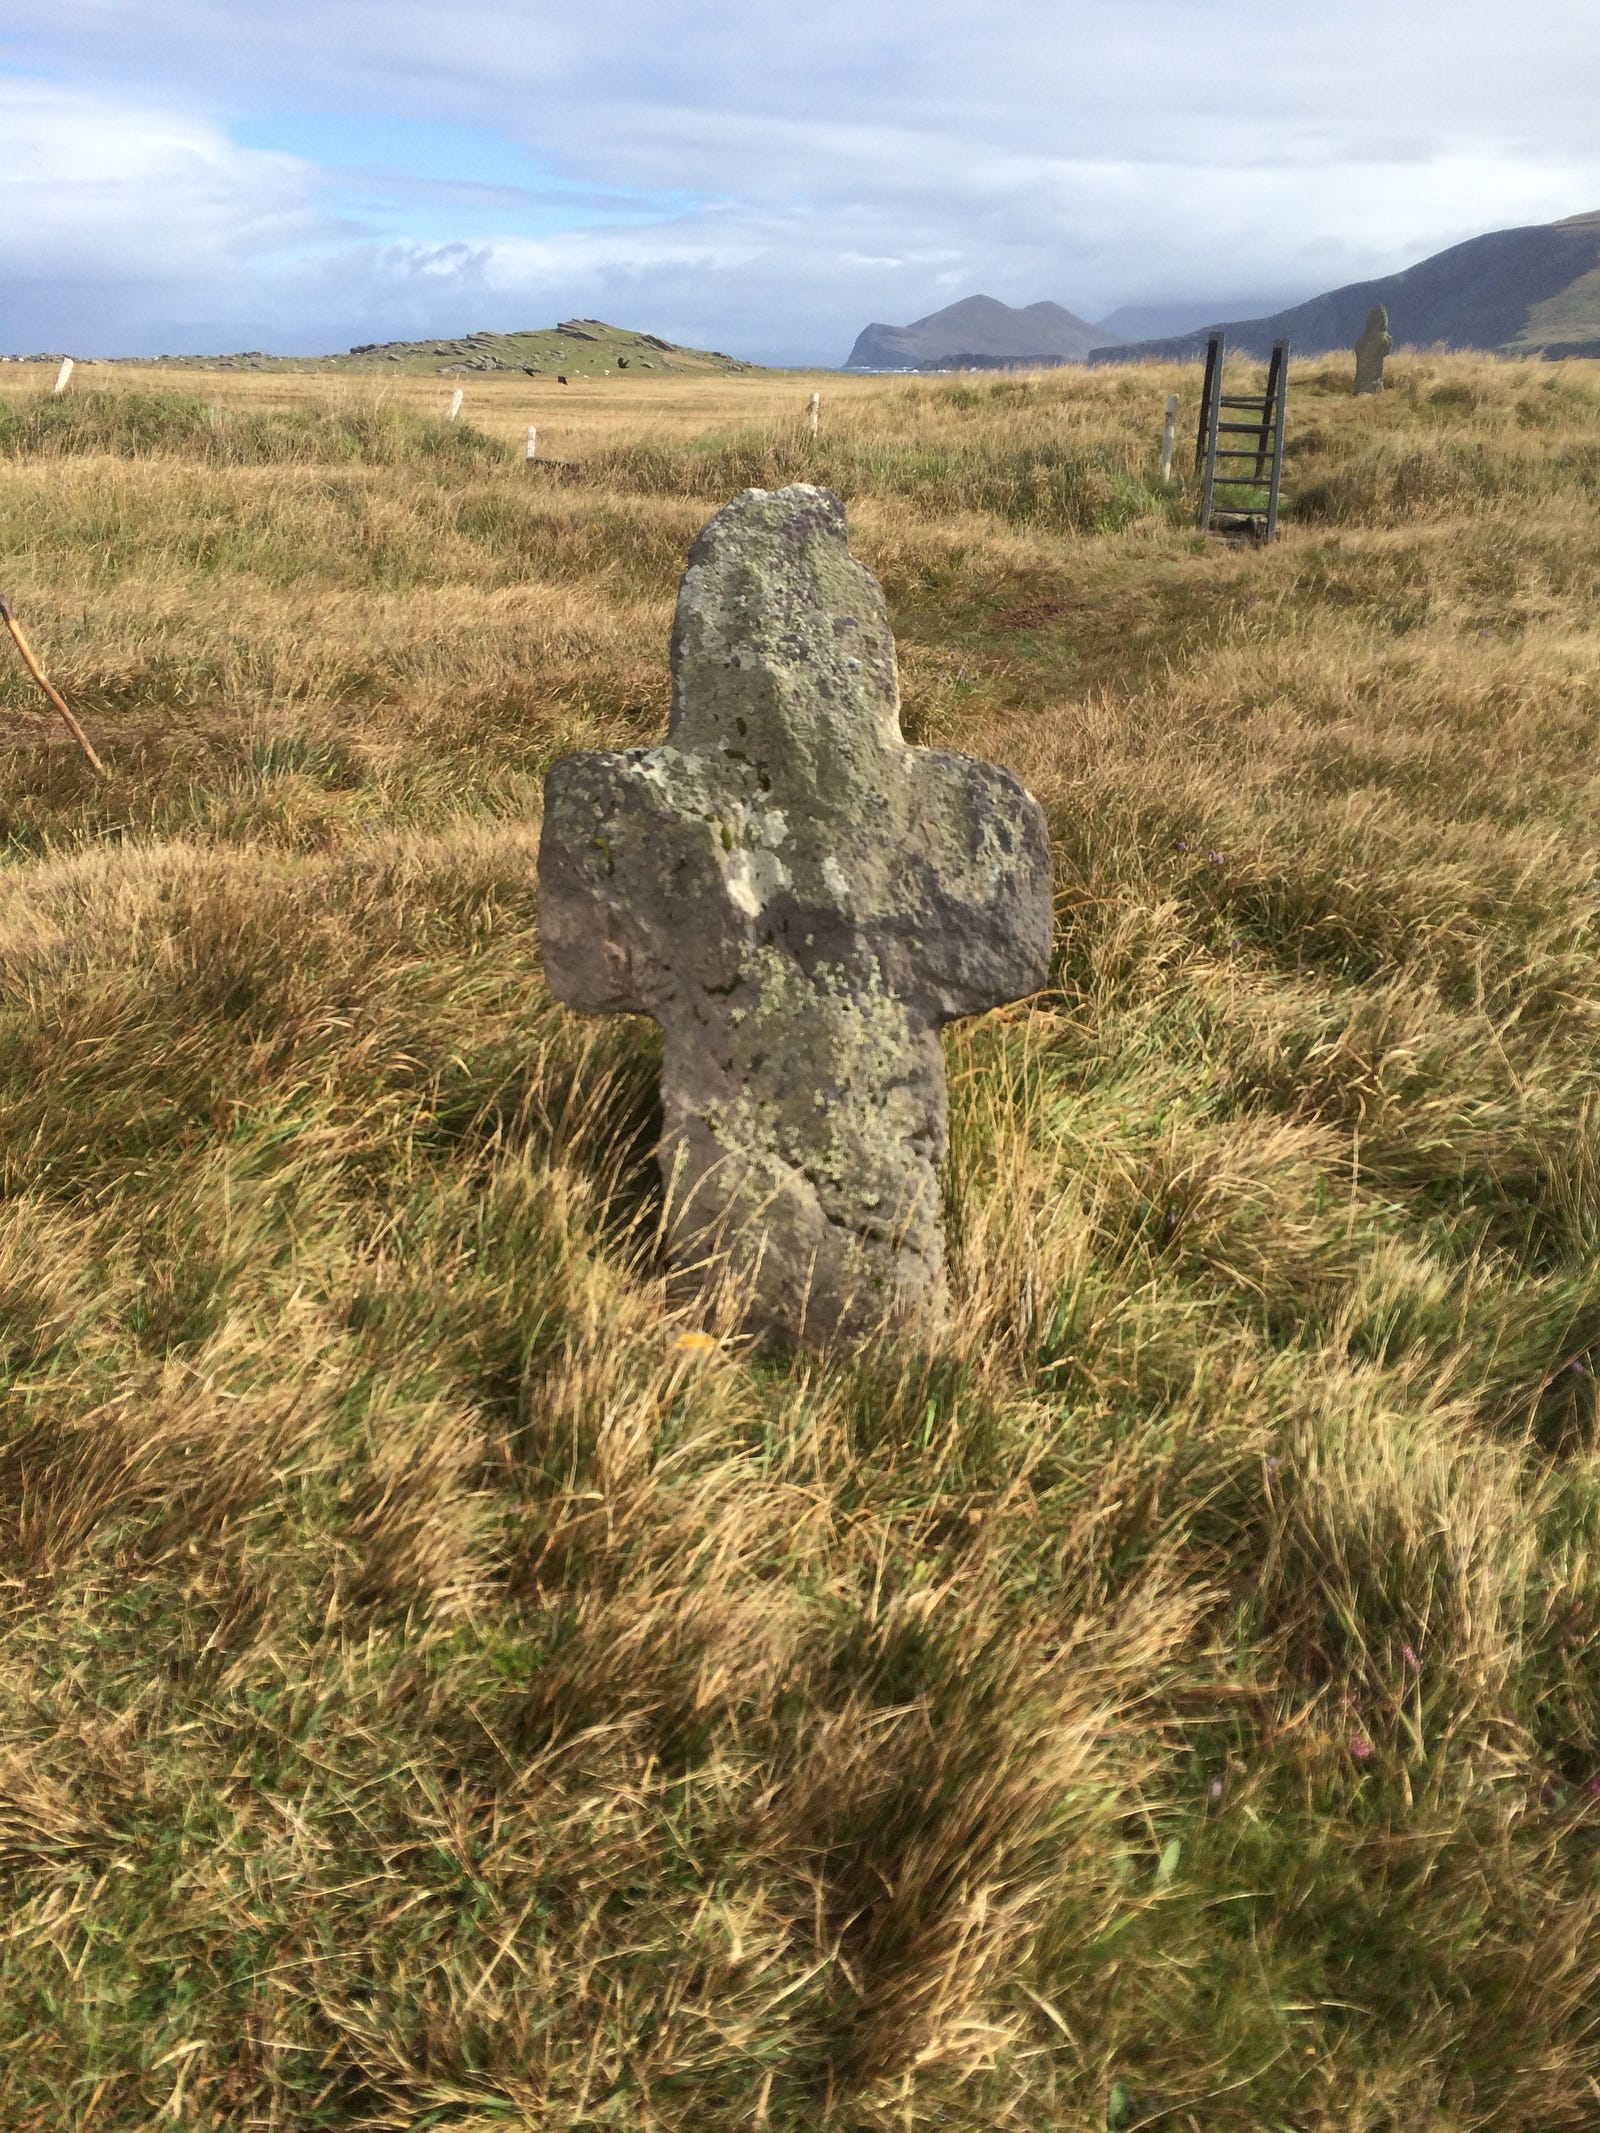 Photo of a standing stone cross at St Brendan’s Well on Valentia Island, Ireland. The cross is rough-hewn and ancient, and stands among the salt grasses.